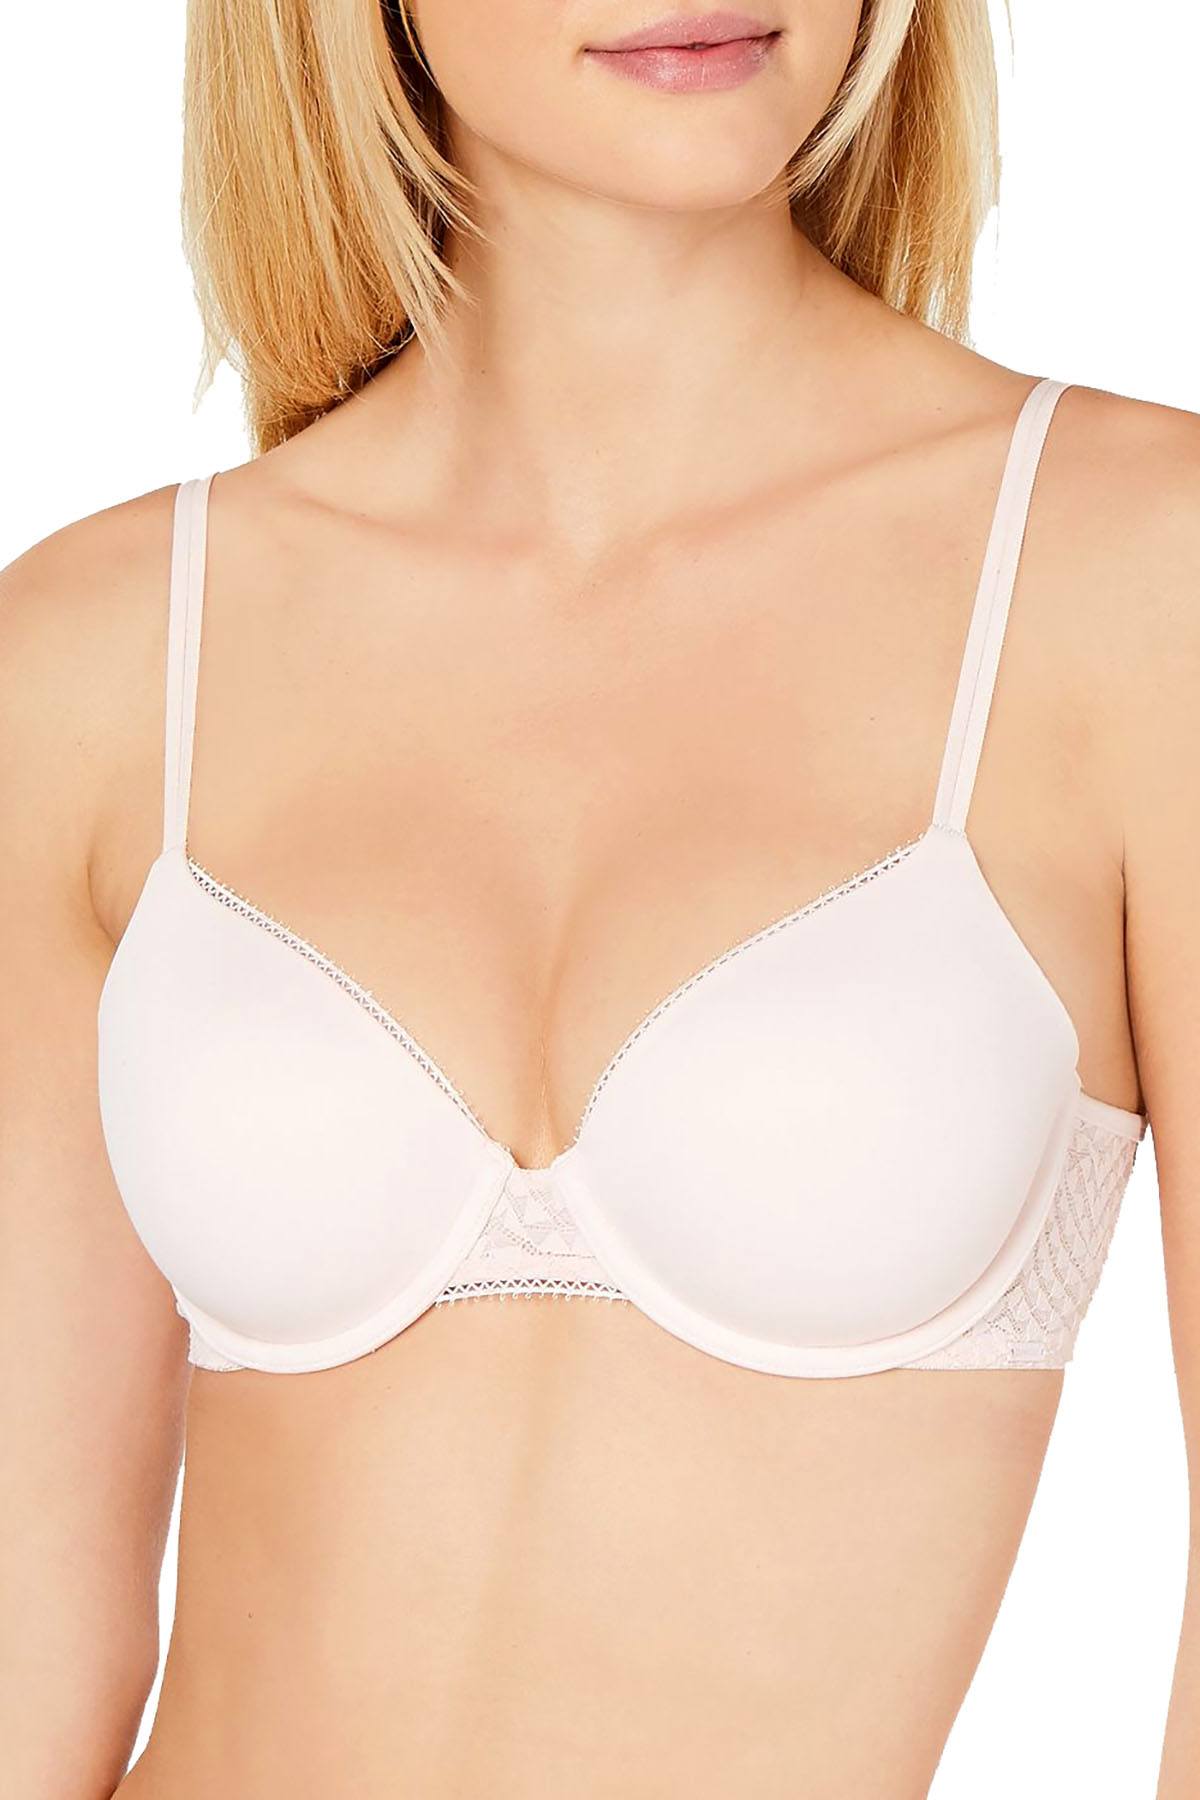 Calvin Klein Perfectly Fit Full Coverage T-shirt Bra F3837